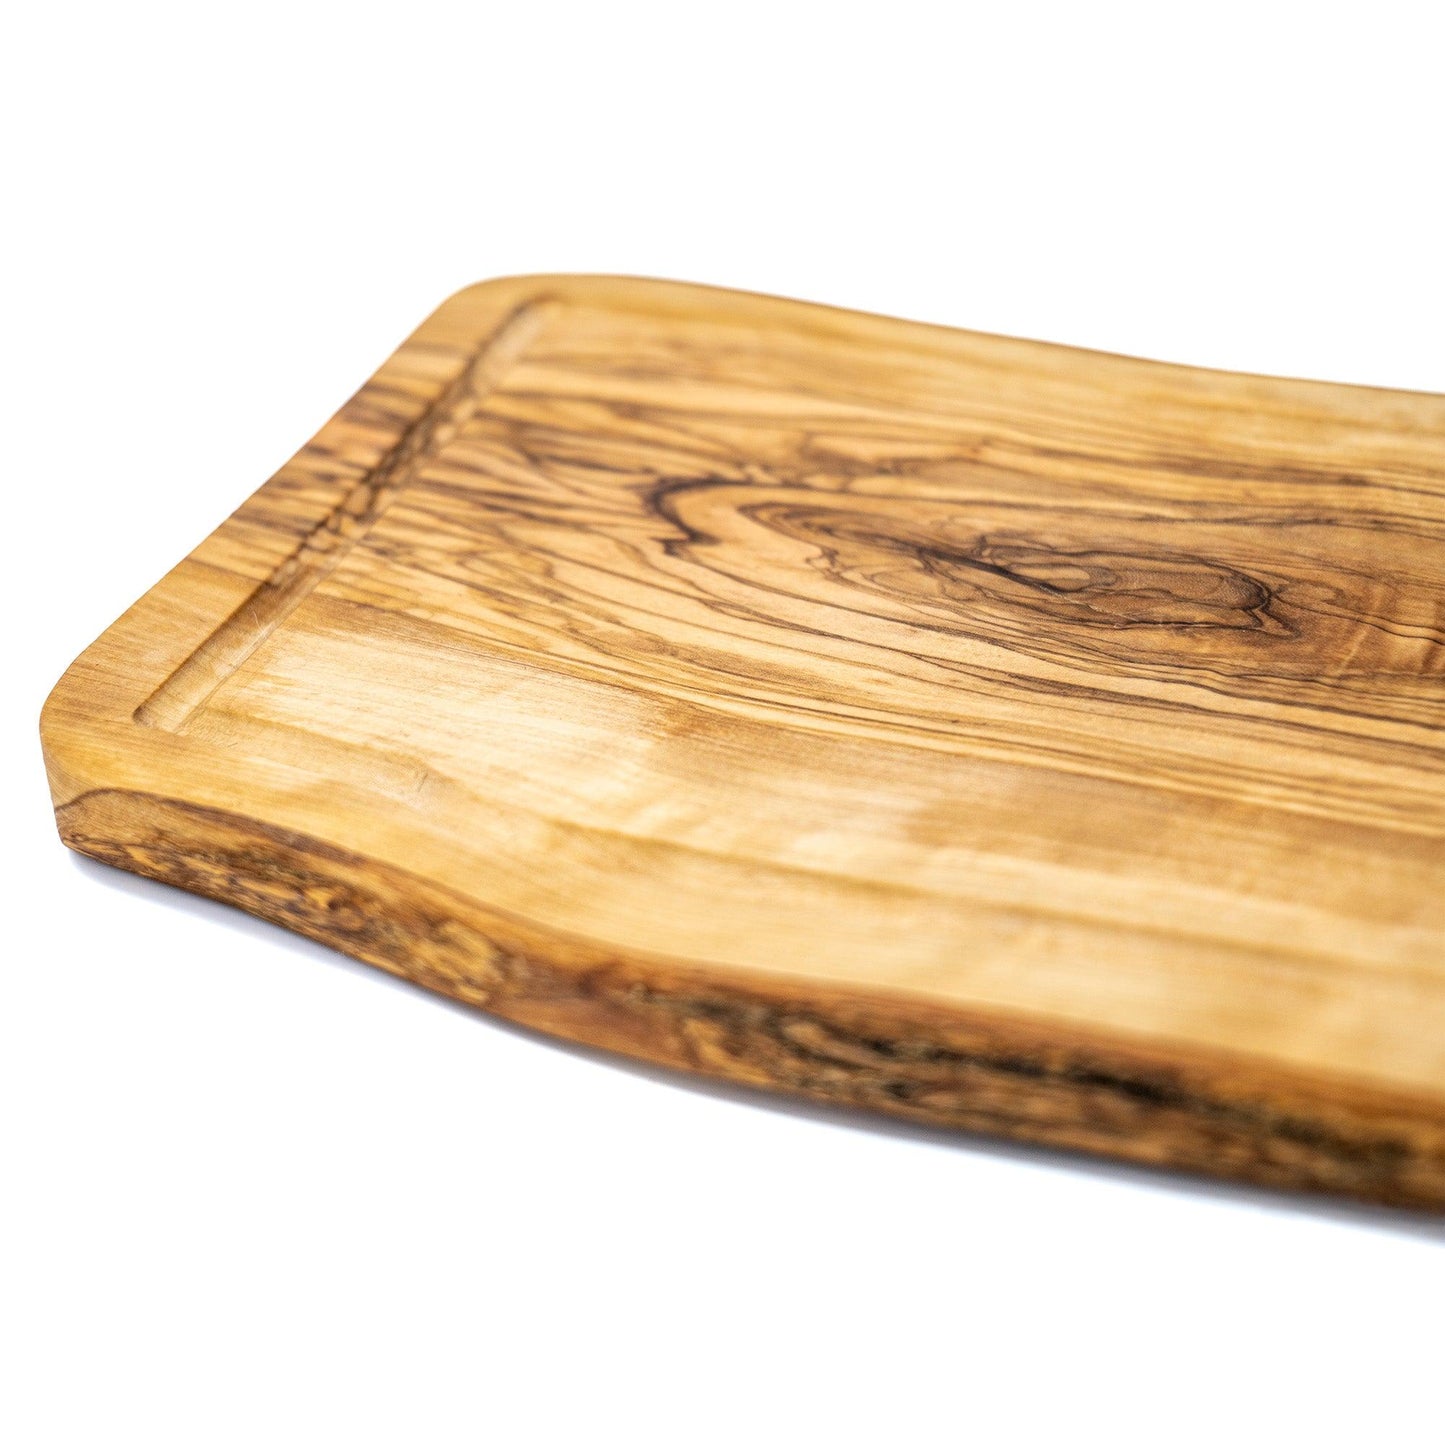 Rustic Steak and Serving Board With Juice Groove - Goya Blue